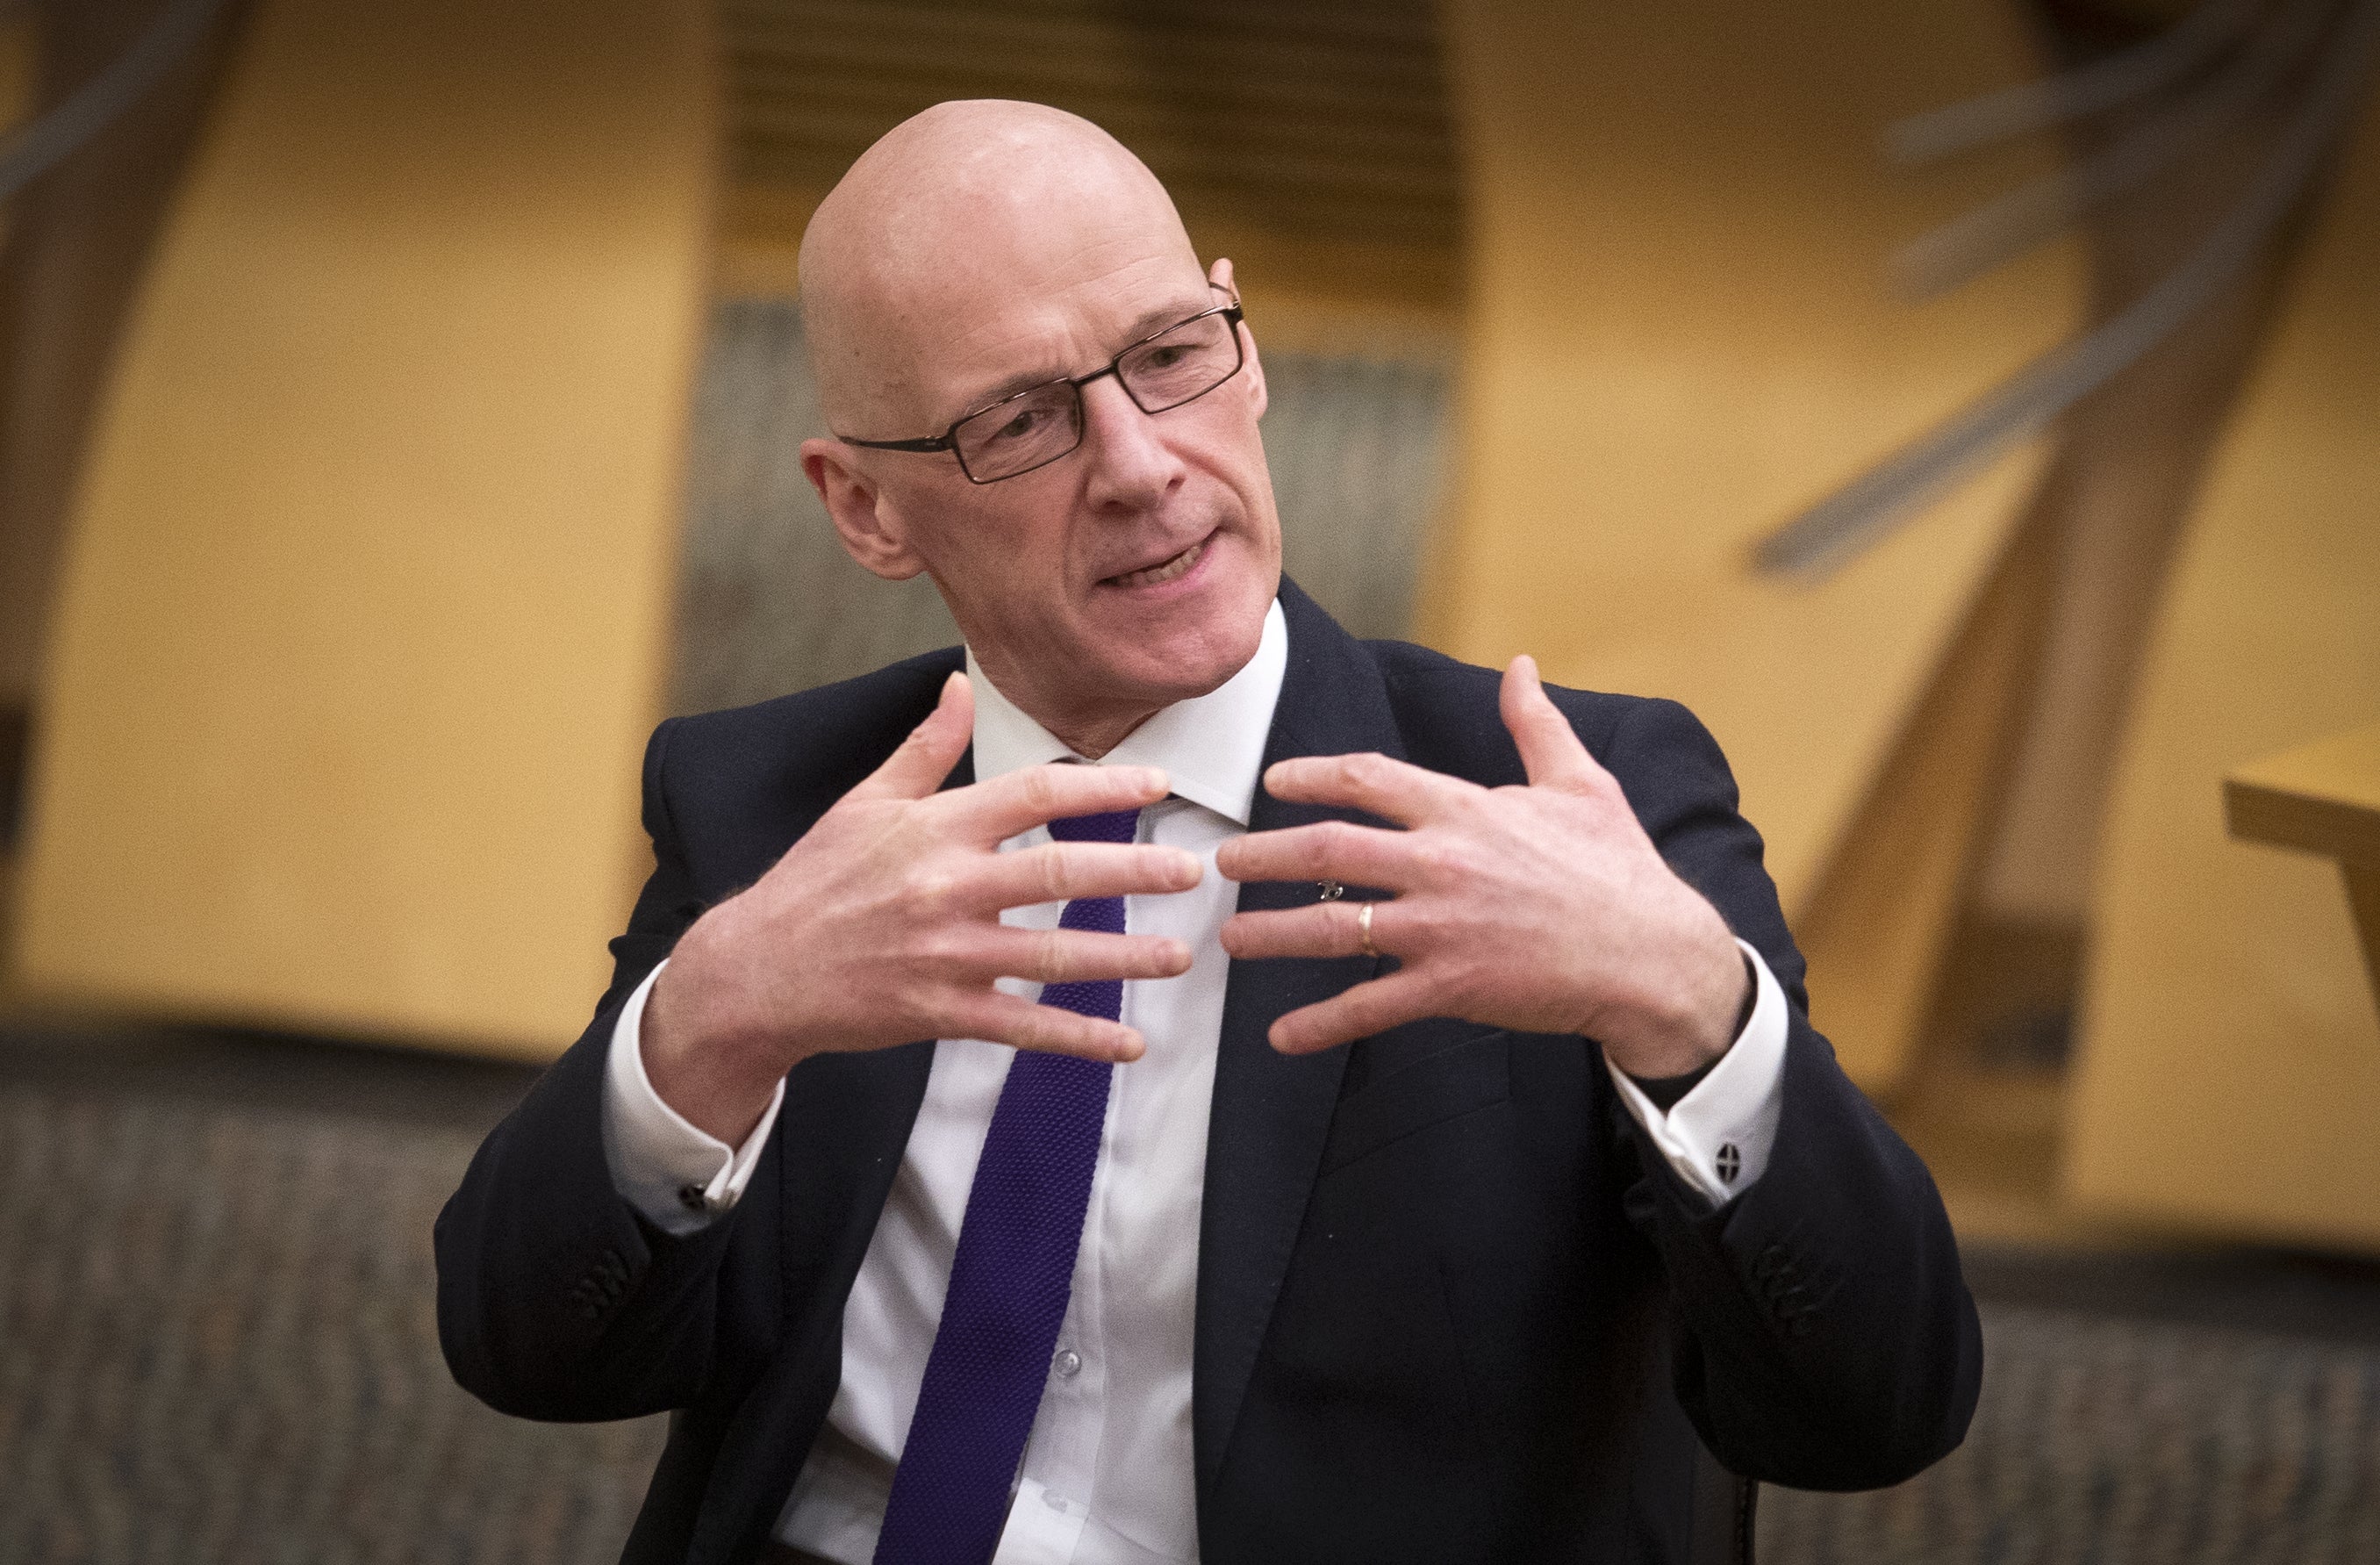 John Swinney said he ‘welcomes’ the commitment to reaching a fair pay deal in the ongoing council pay row (Jane Barlow/PA)